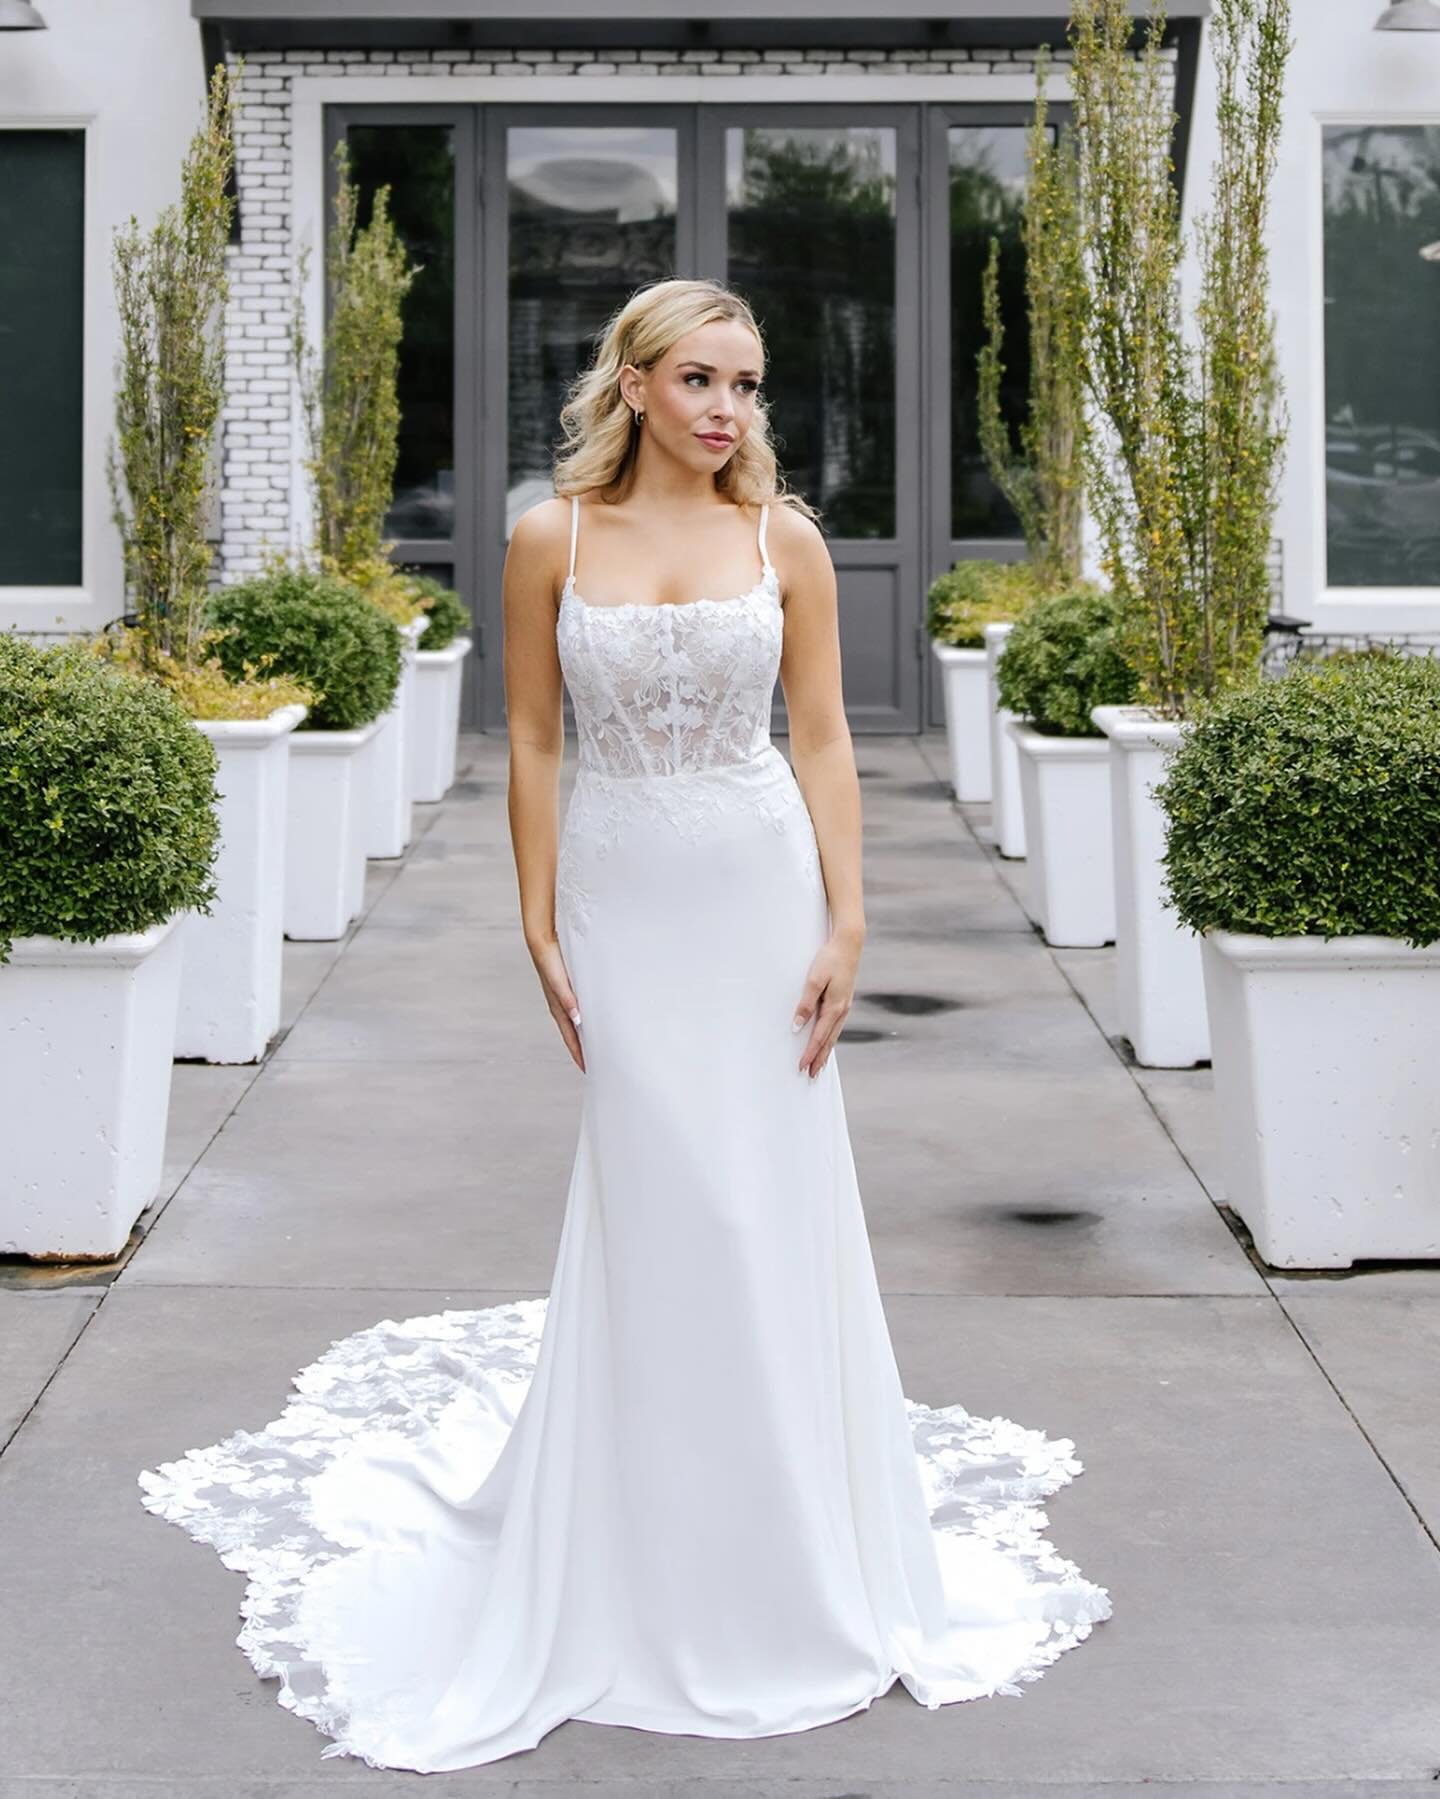 Absolute magic this season from @missstellayork 😍 This beauty is now available for try on 🤍

#alaskabride #alaskabridalshop #stellayorkbridal #stellayork #modernbride #coolbride #minimalbride